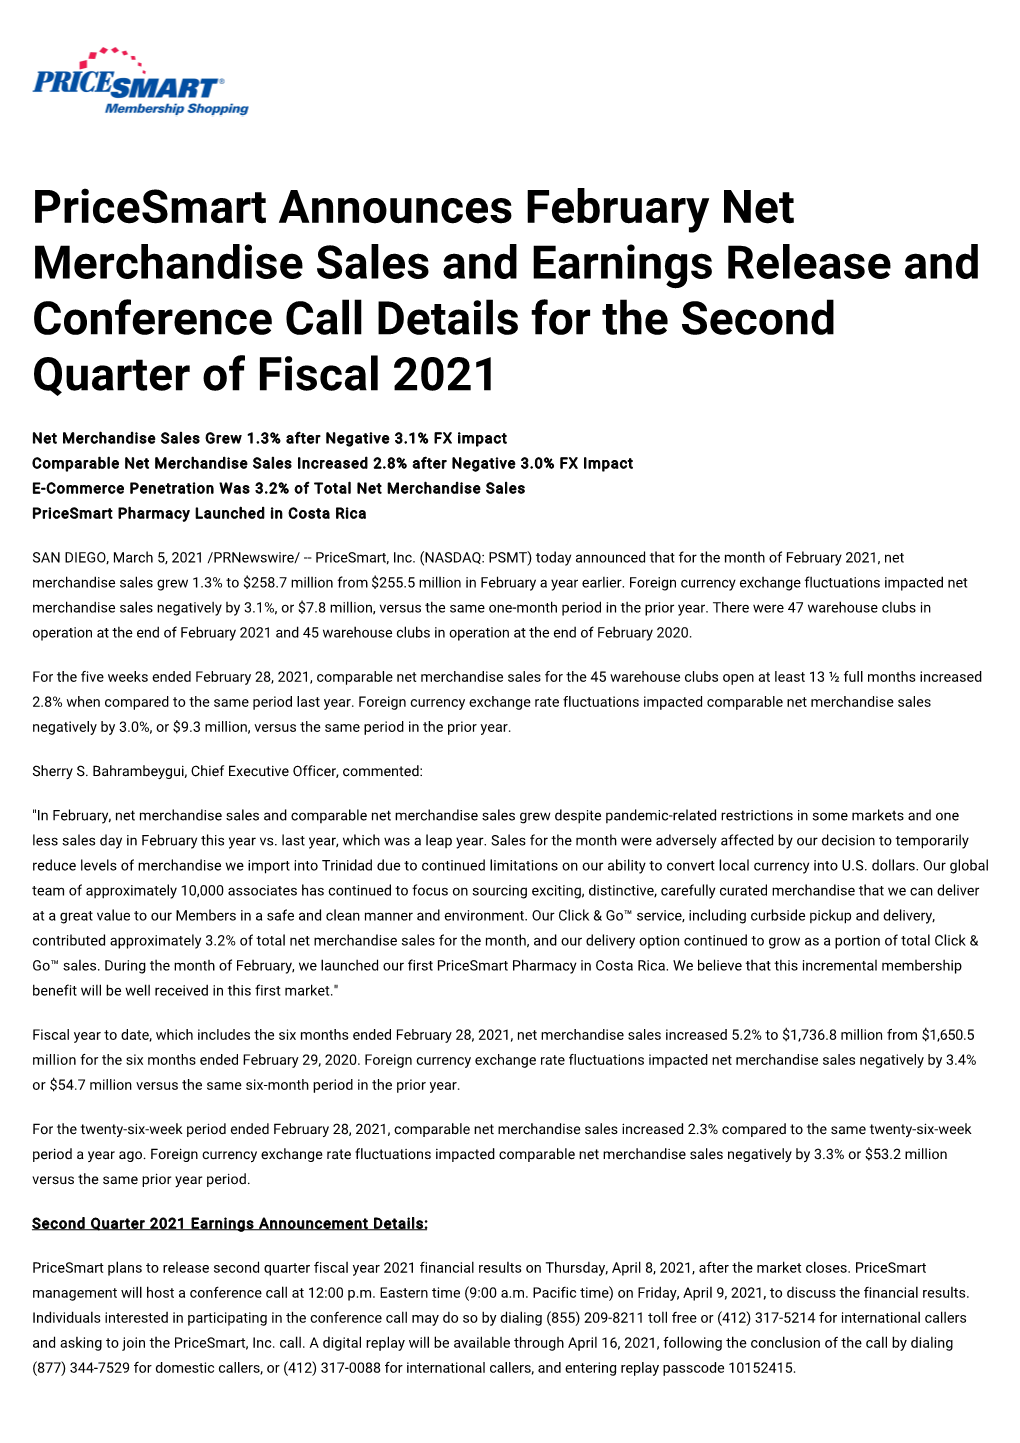 Pricesmart Announces February Net Merchandise Sales and Earnings Release and Conference Call Details for the Second Quarter of Fiscal 2021